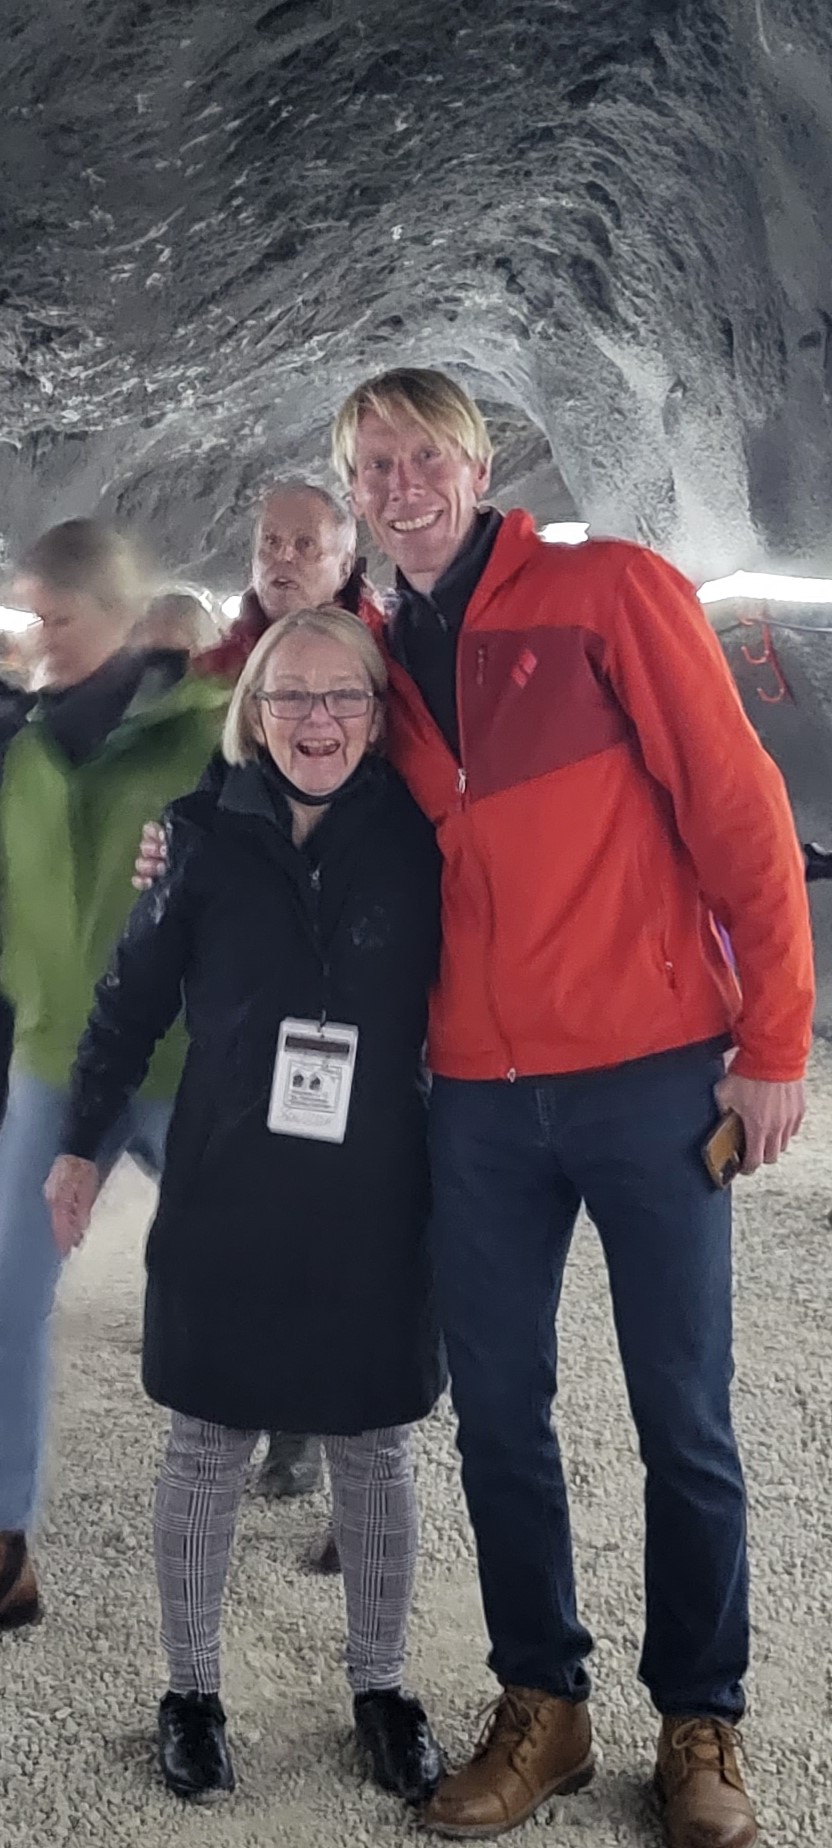 Sally and former Park City Mayor Andy Beerman in the Spiro Tunnel after its renovation and interpretation a couple of years ago